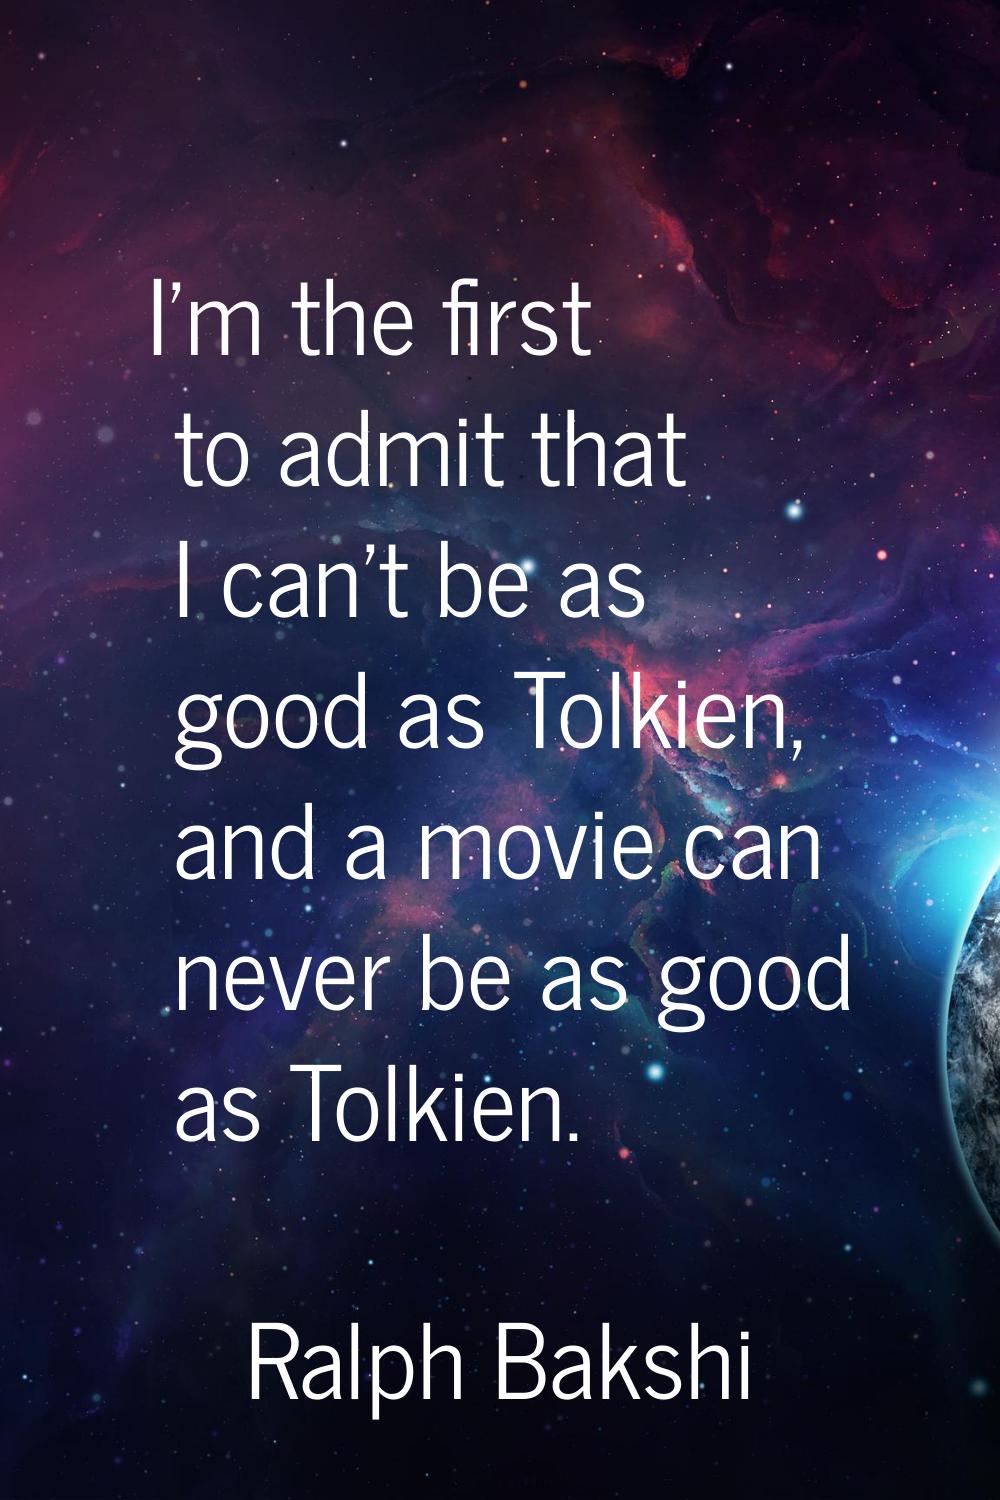 I'm the first to admit that I can't be as good as Tolkien, and a movie can never be as good as Tolk